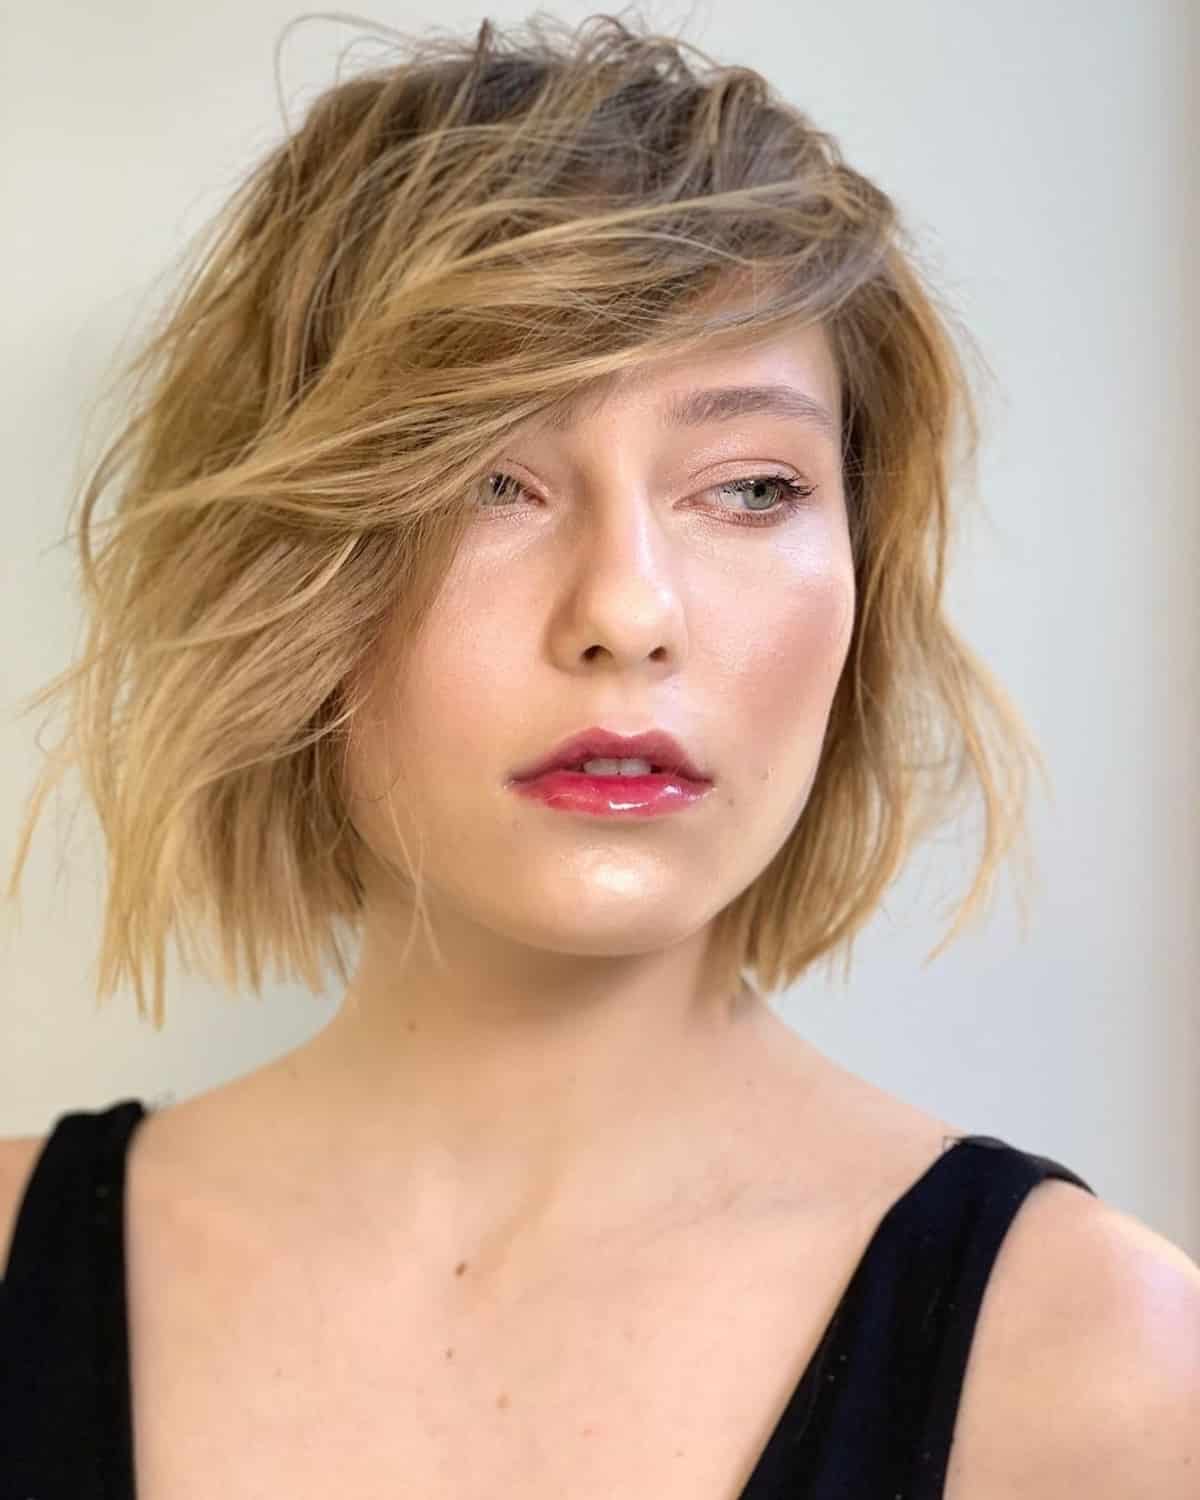 Blunt bob with side-swept bangs